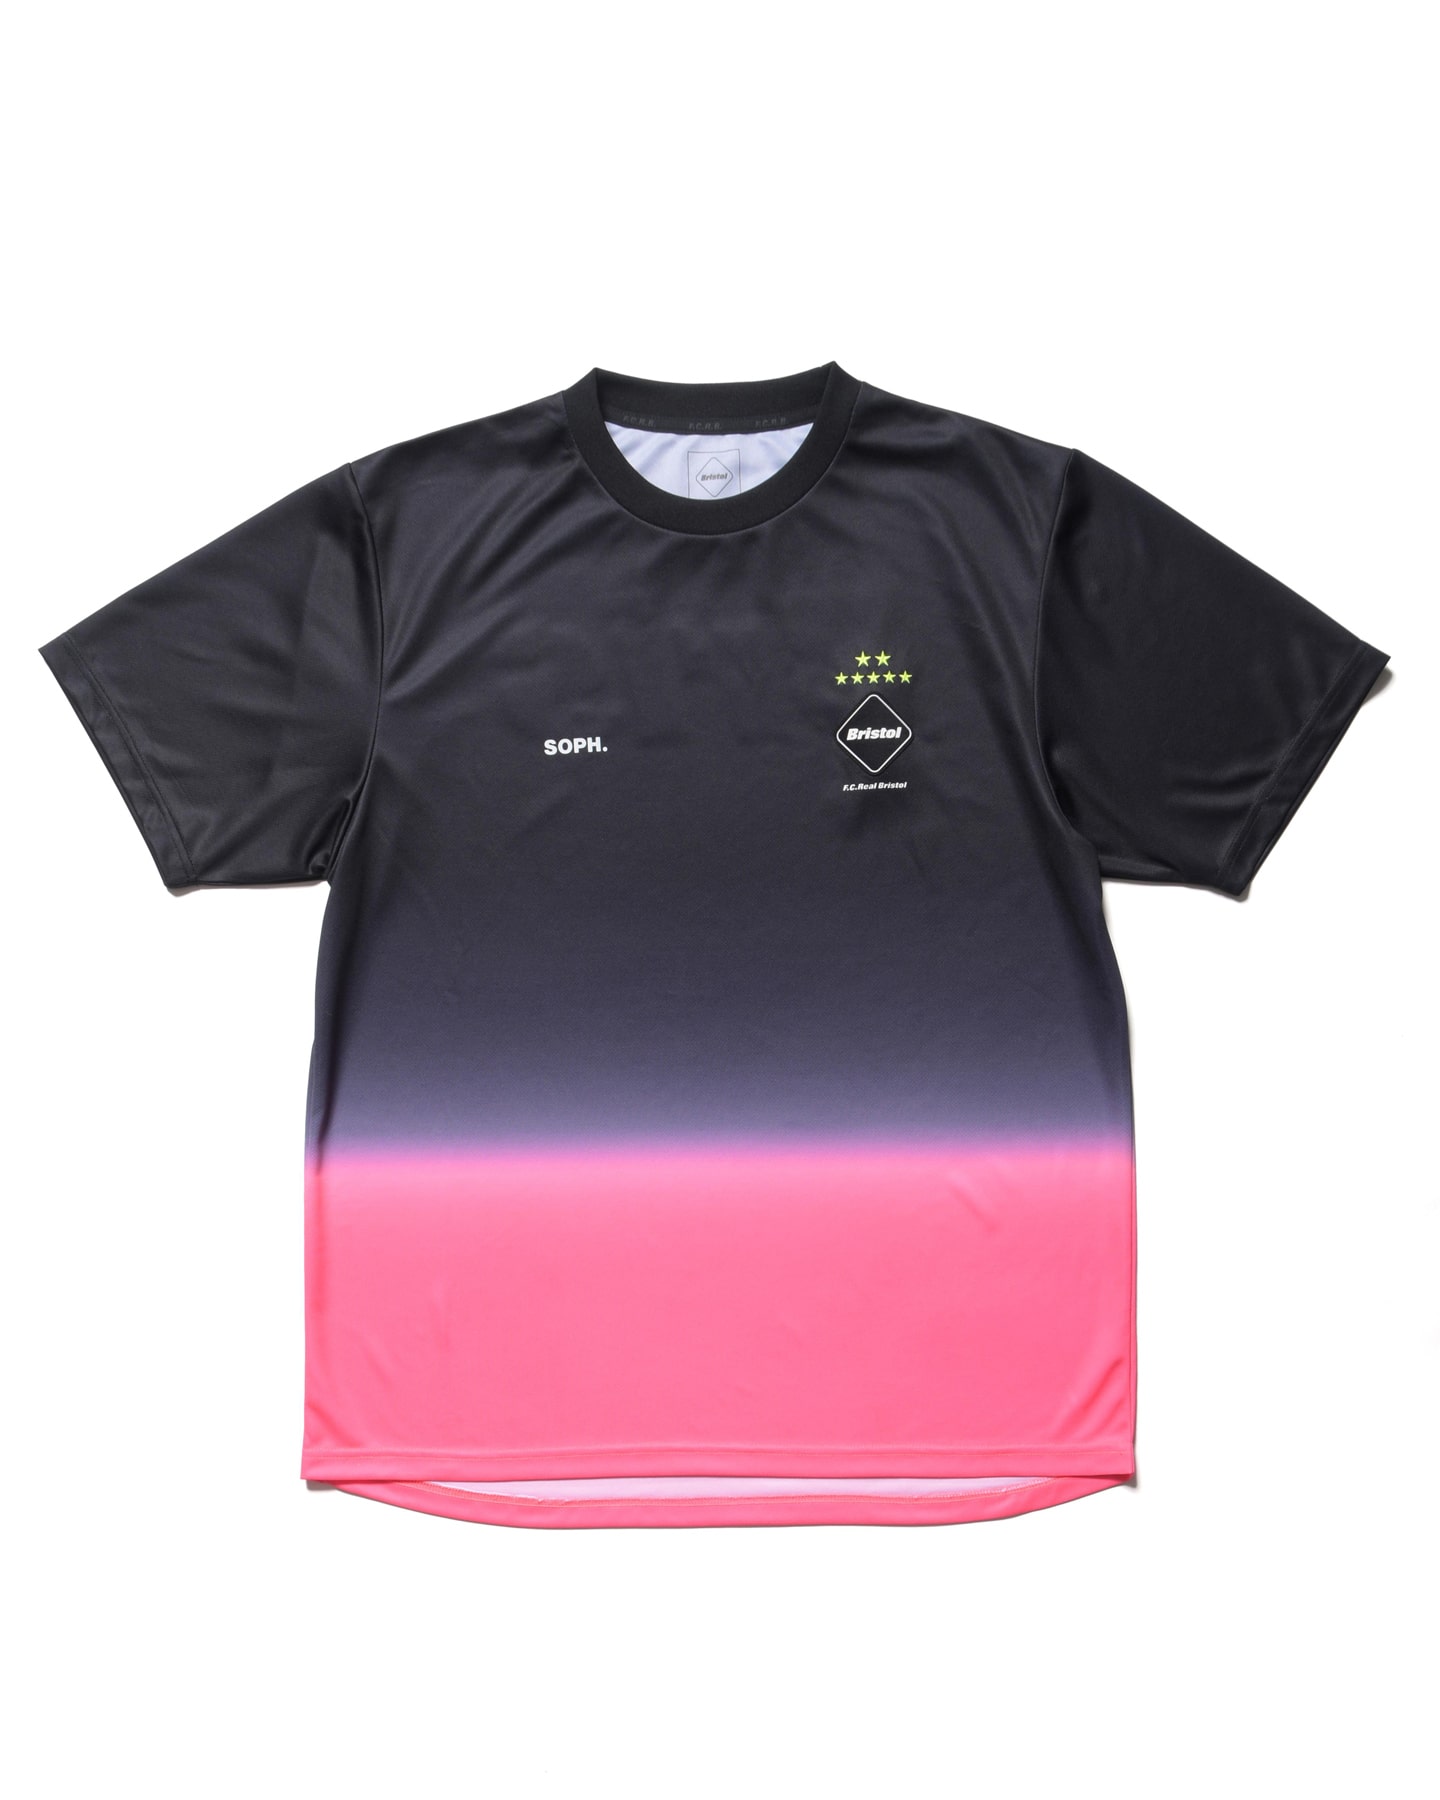 FCRB 23ss S/S GRADATION PRE MATCH TOP